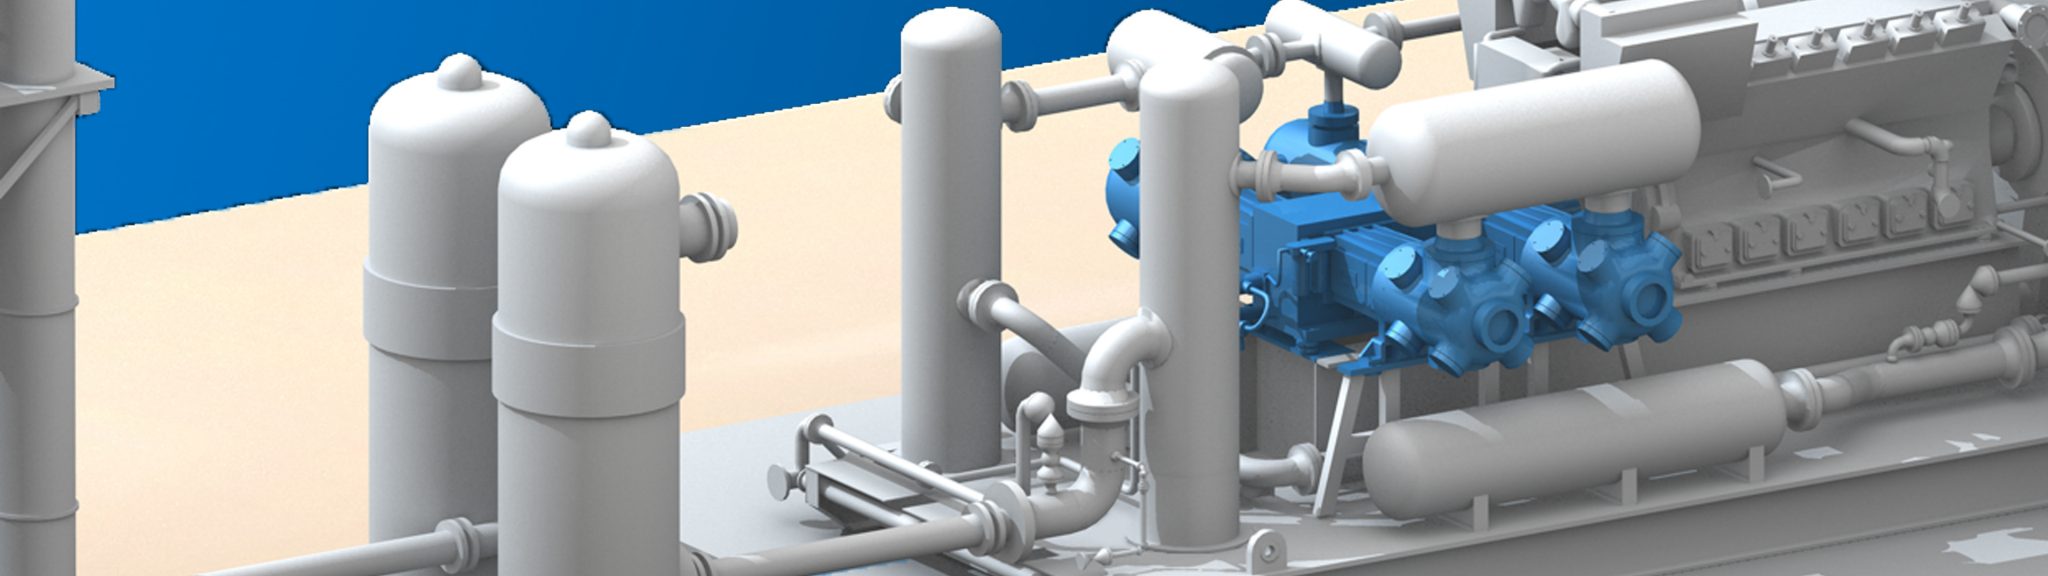 A rendering of an Ariel Compressor within a Acid Gas Service Unit being used to compress and dispose of the corrosive, acidic mixture